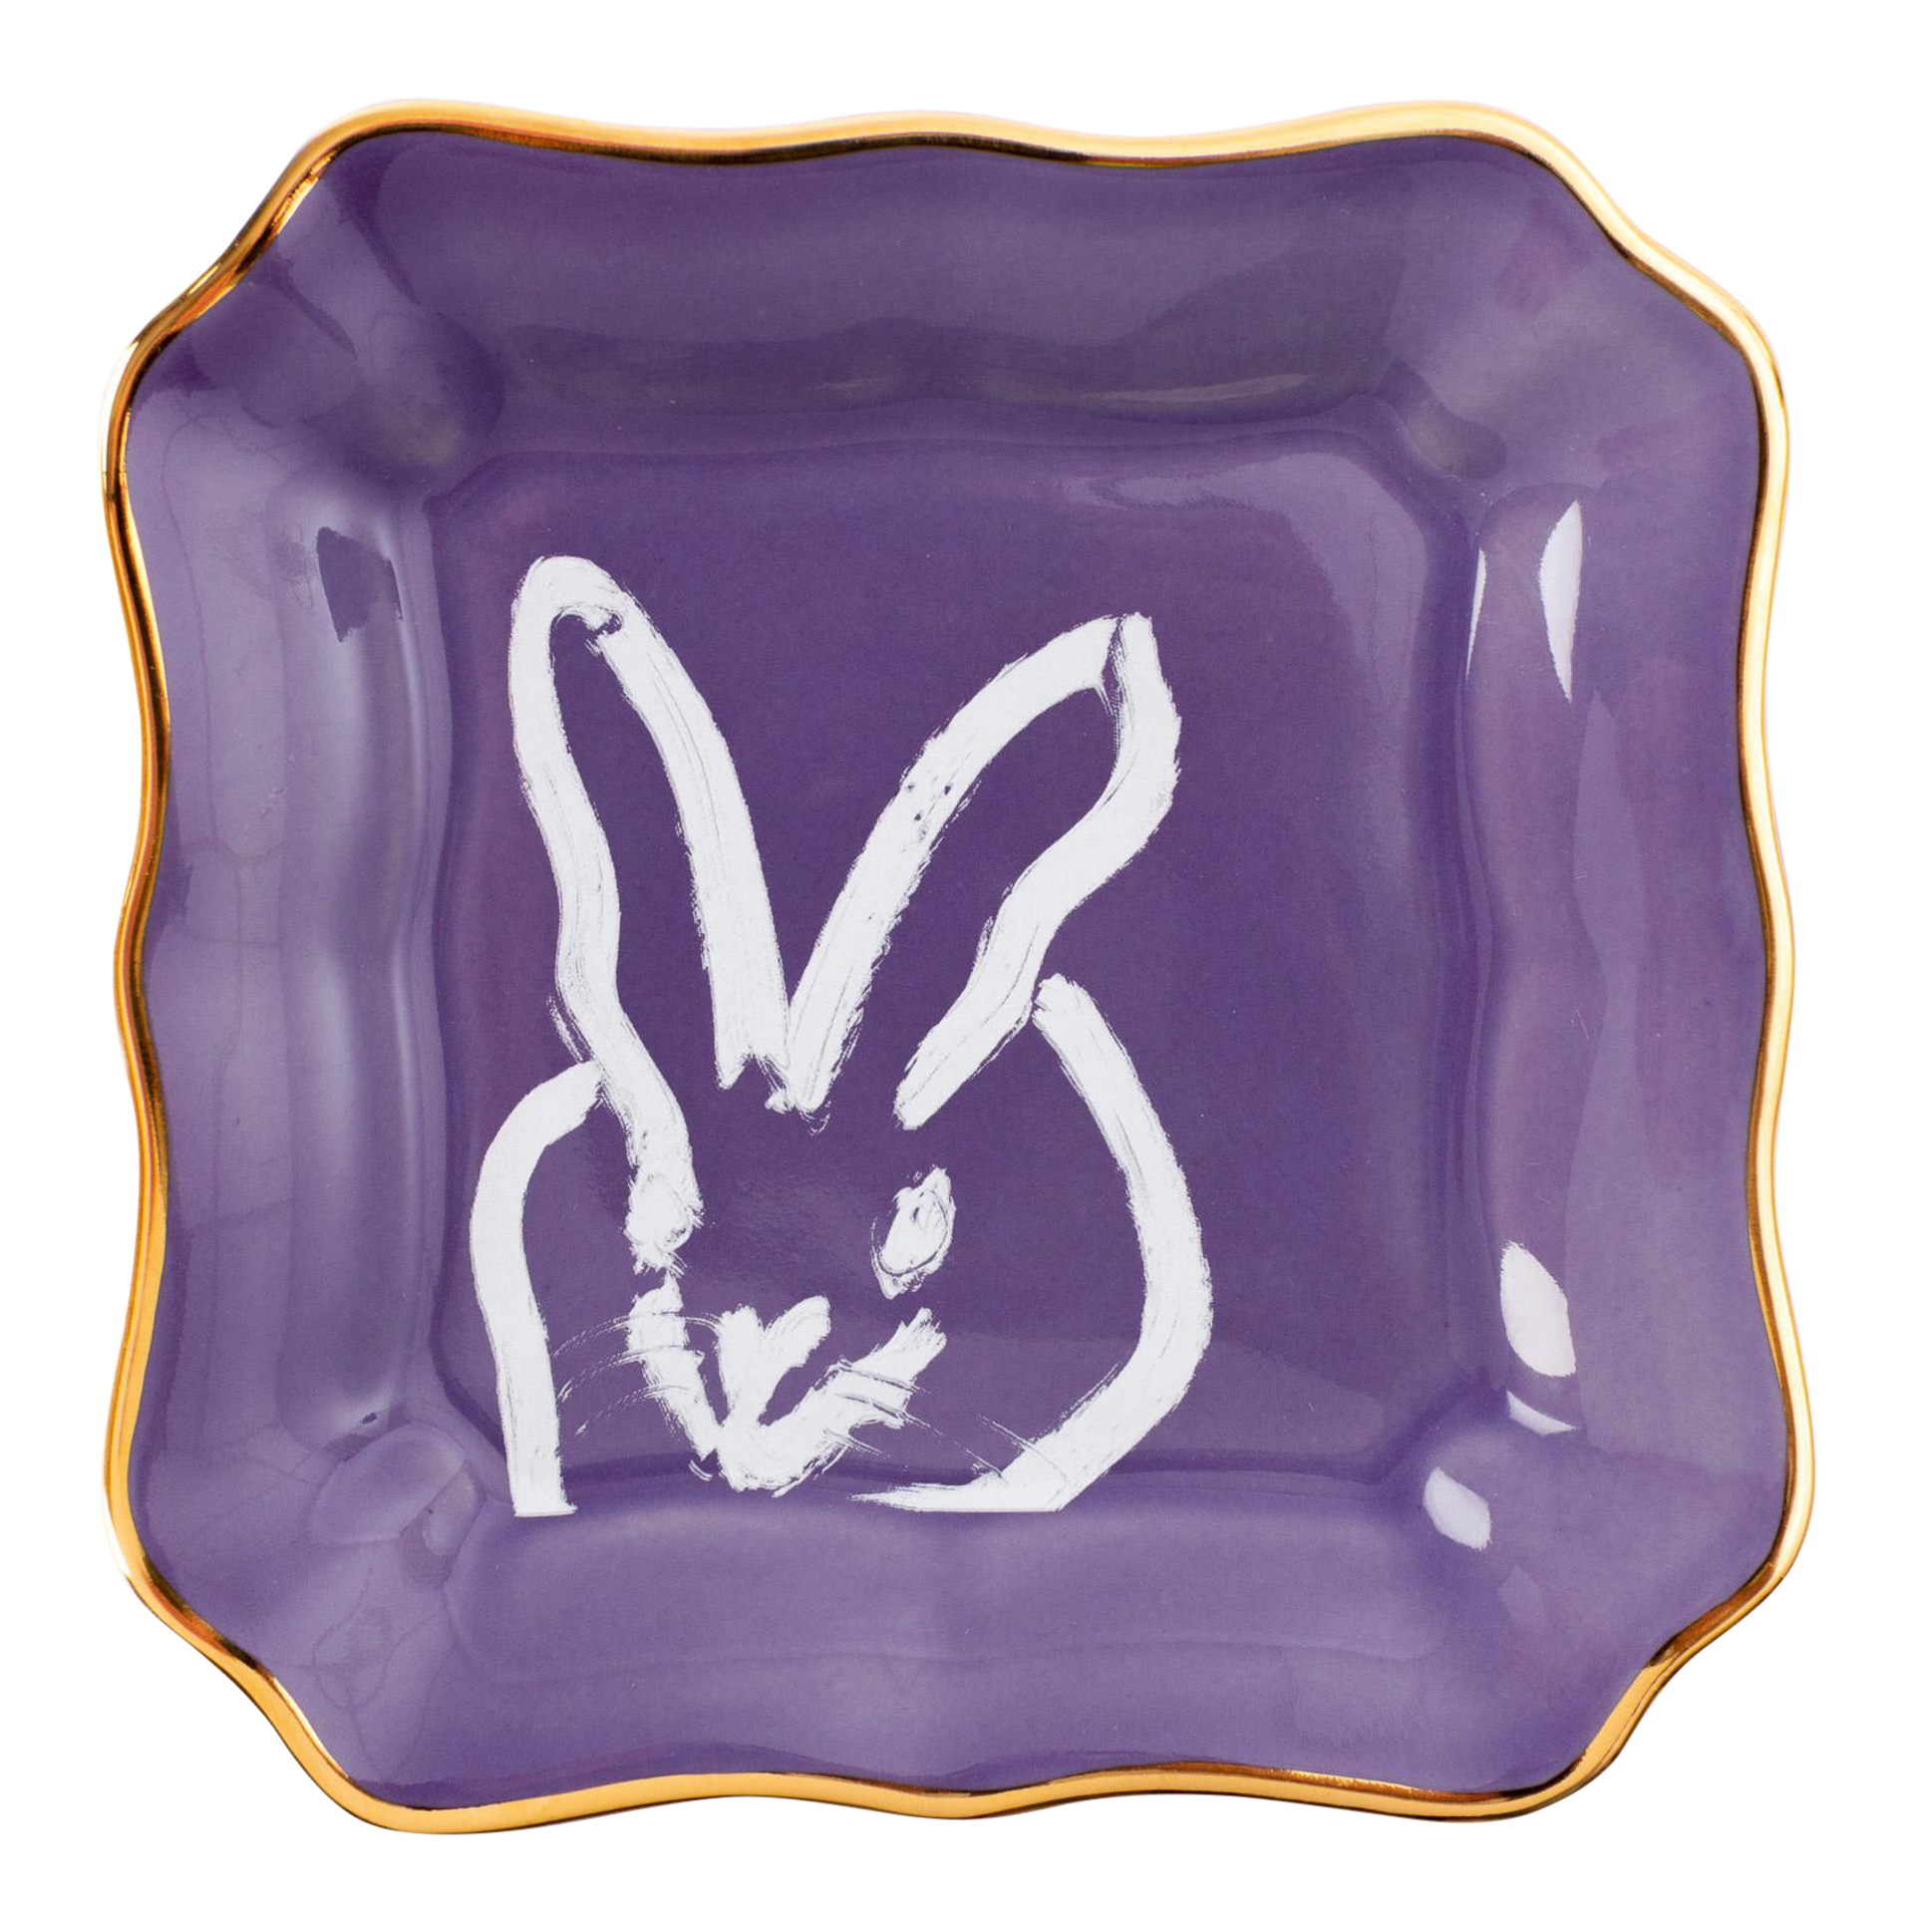 Bunny Portrait Plates: Lilac with Gold by Hunt Slonem